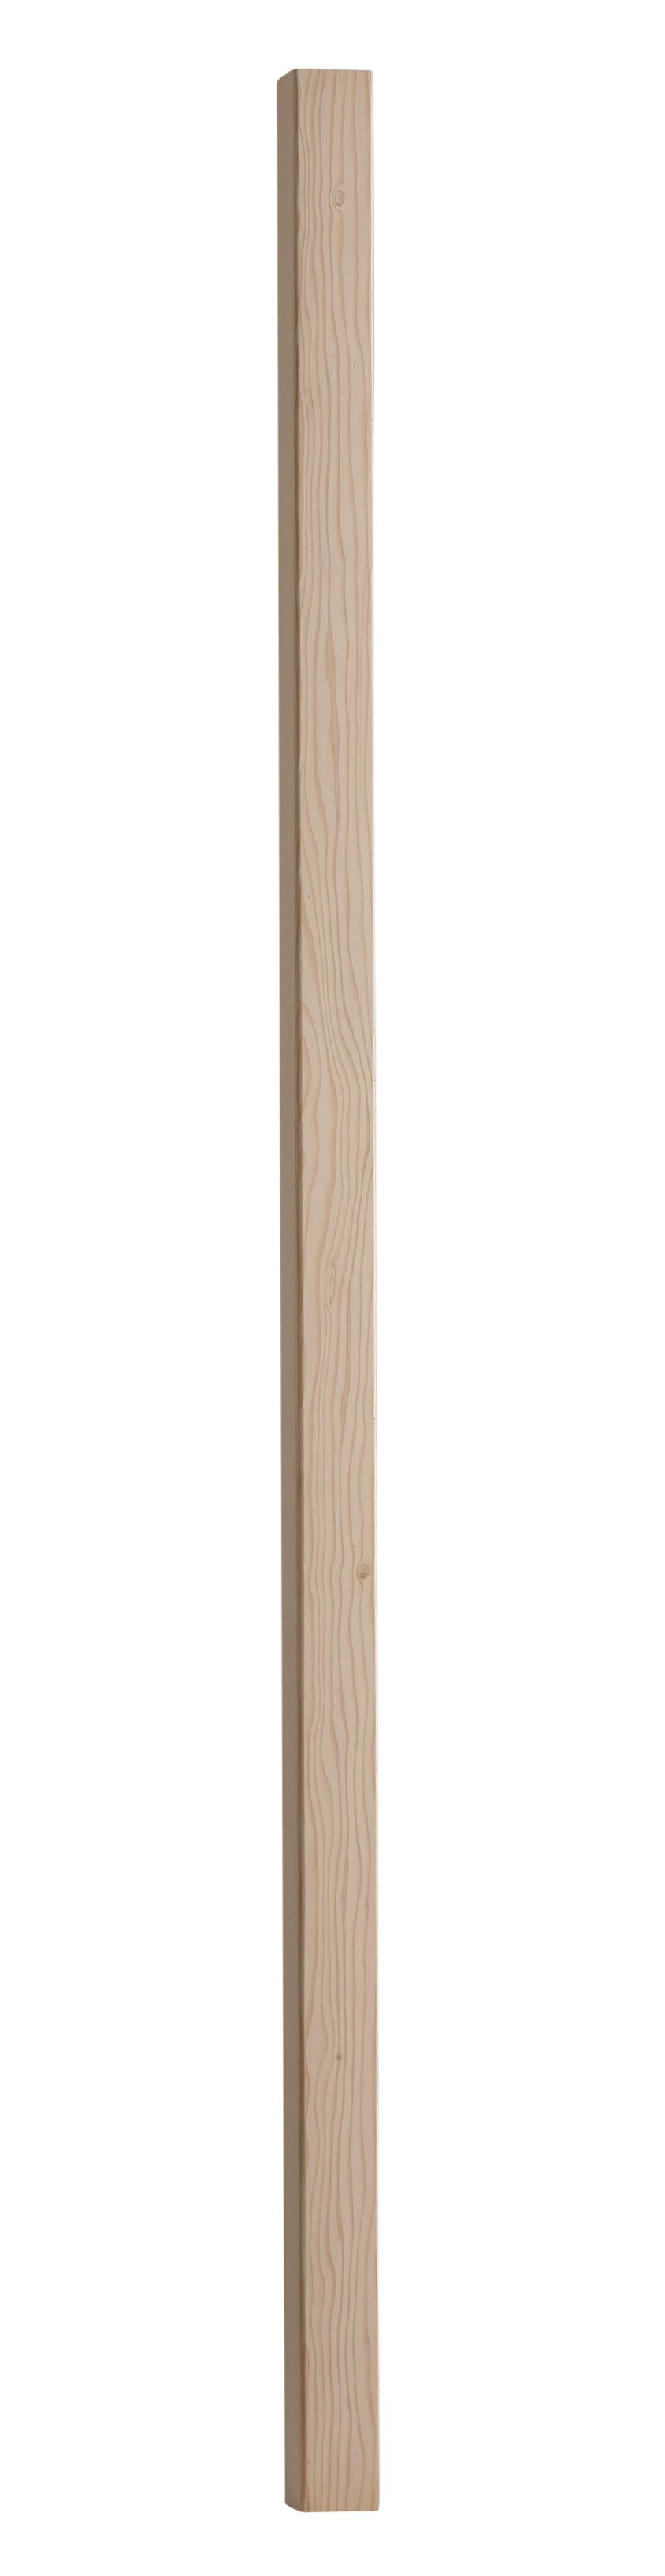 Wickes Contemporary Hemlock Spindle 41 x 900mm